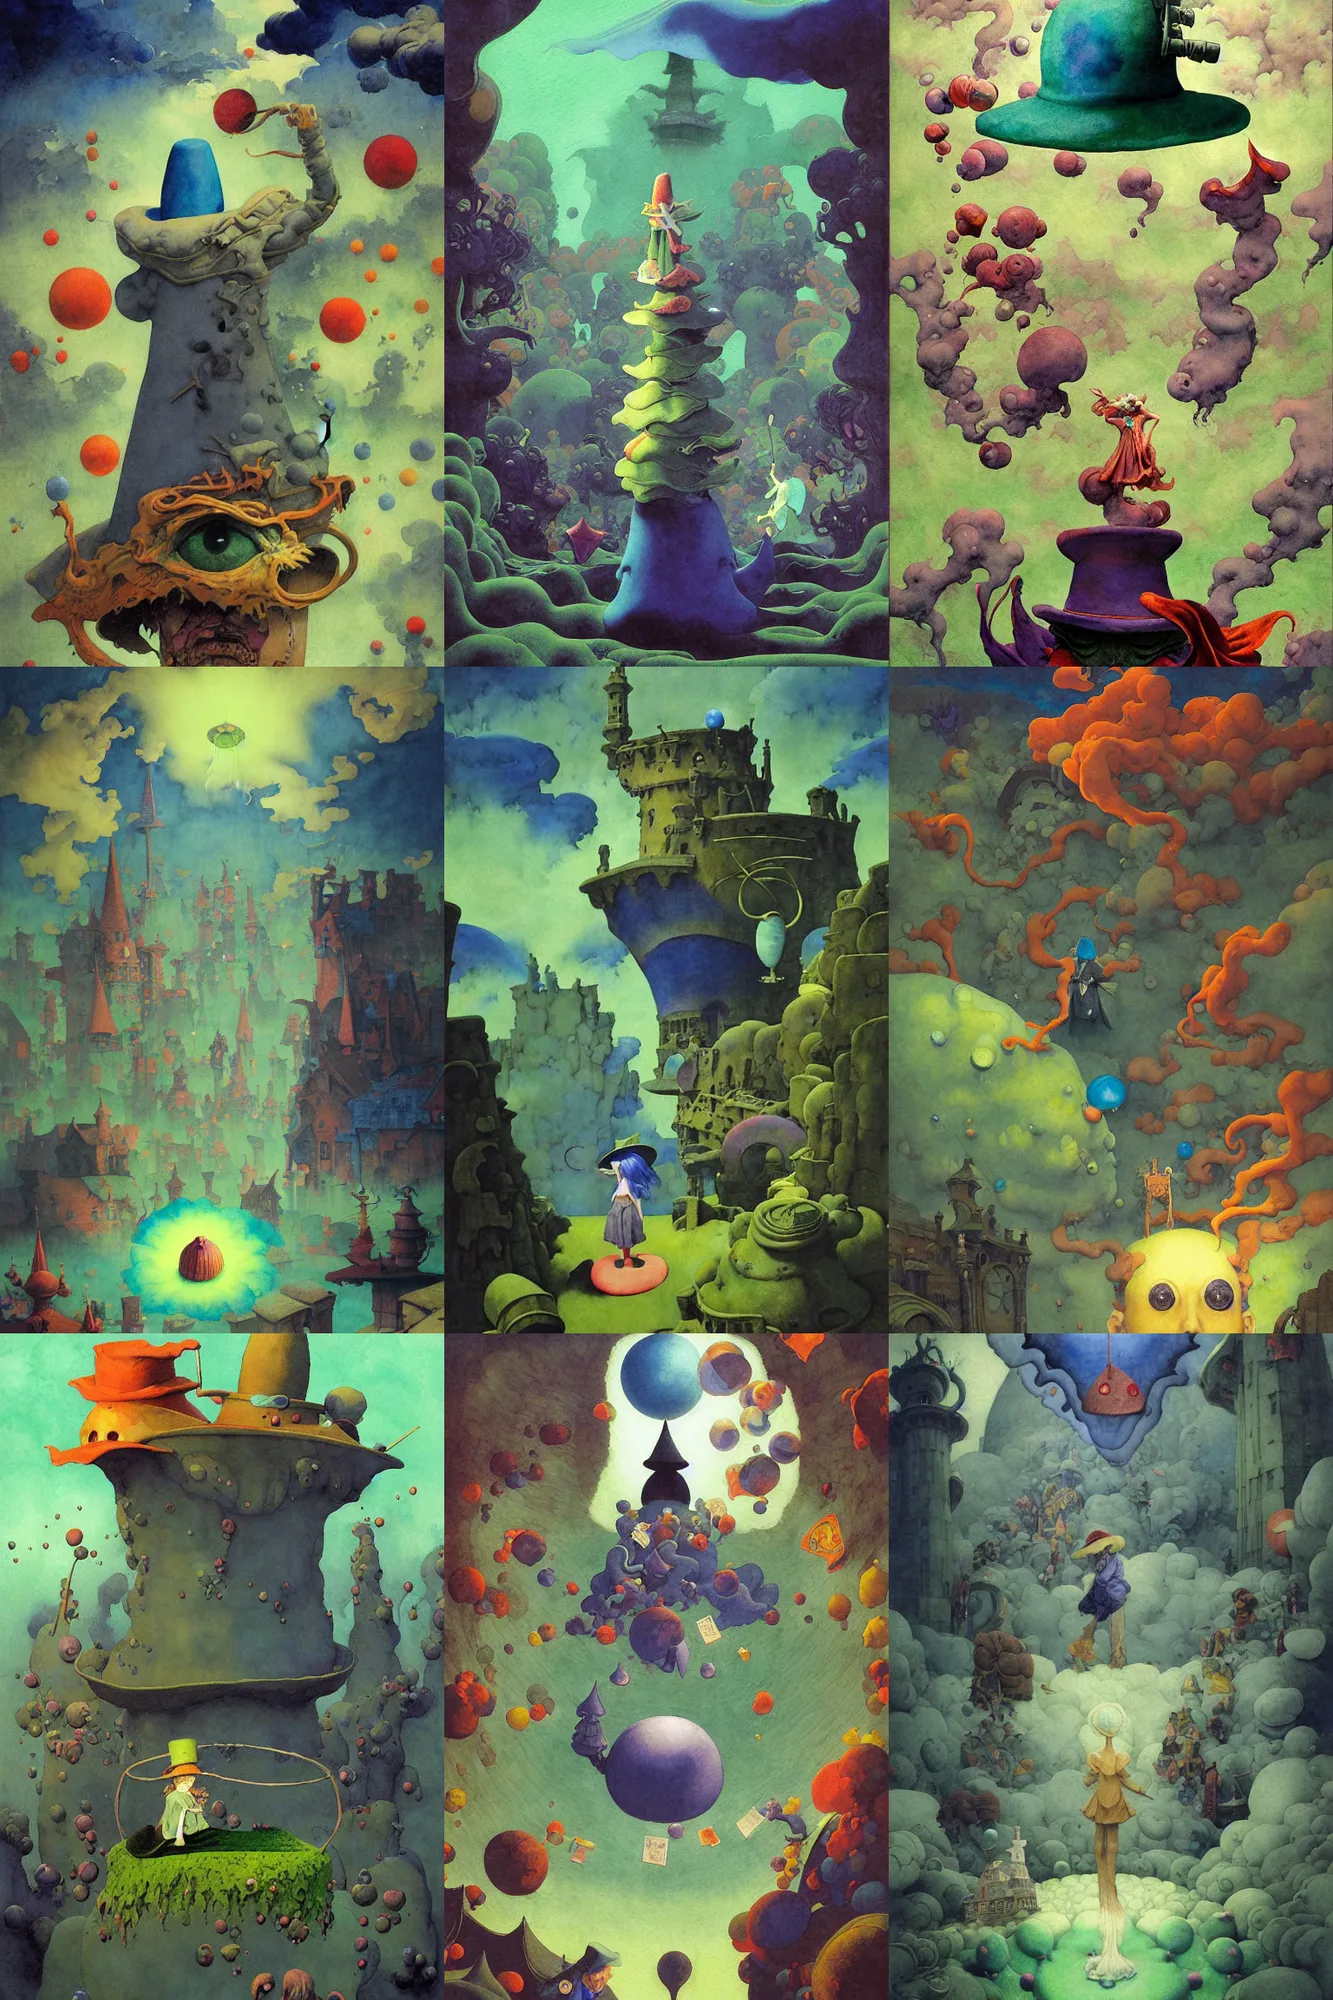 Prompt: dixit card, strange place, giant hat, potions, slime, eyeballs, focal point, character transforming, dark fantasy, intricate, orthographic, amazing composition, colorful watercolor, by ruan jia, by maxfield parrish, by shaun tan, by nc wyeth, by michael whelan, by escher, illustration, gravity rush, volumetric, blue, green